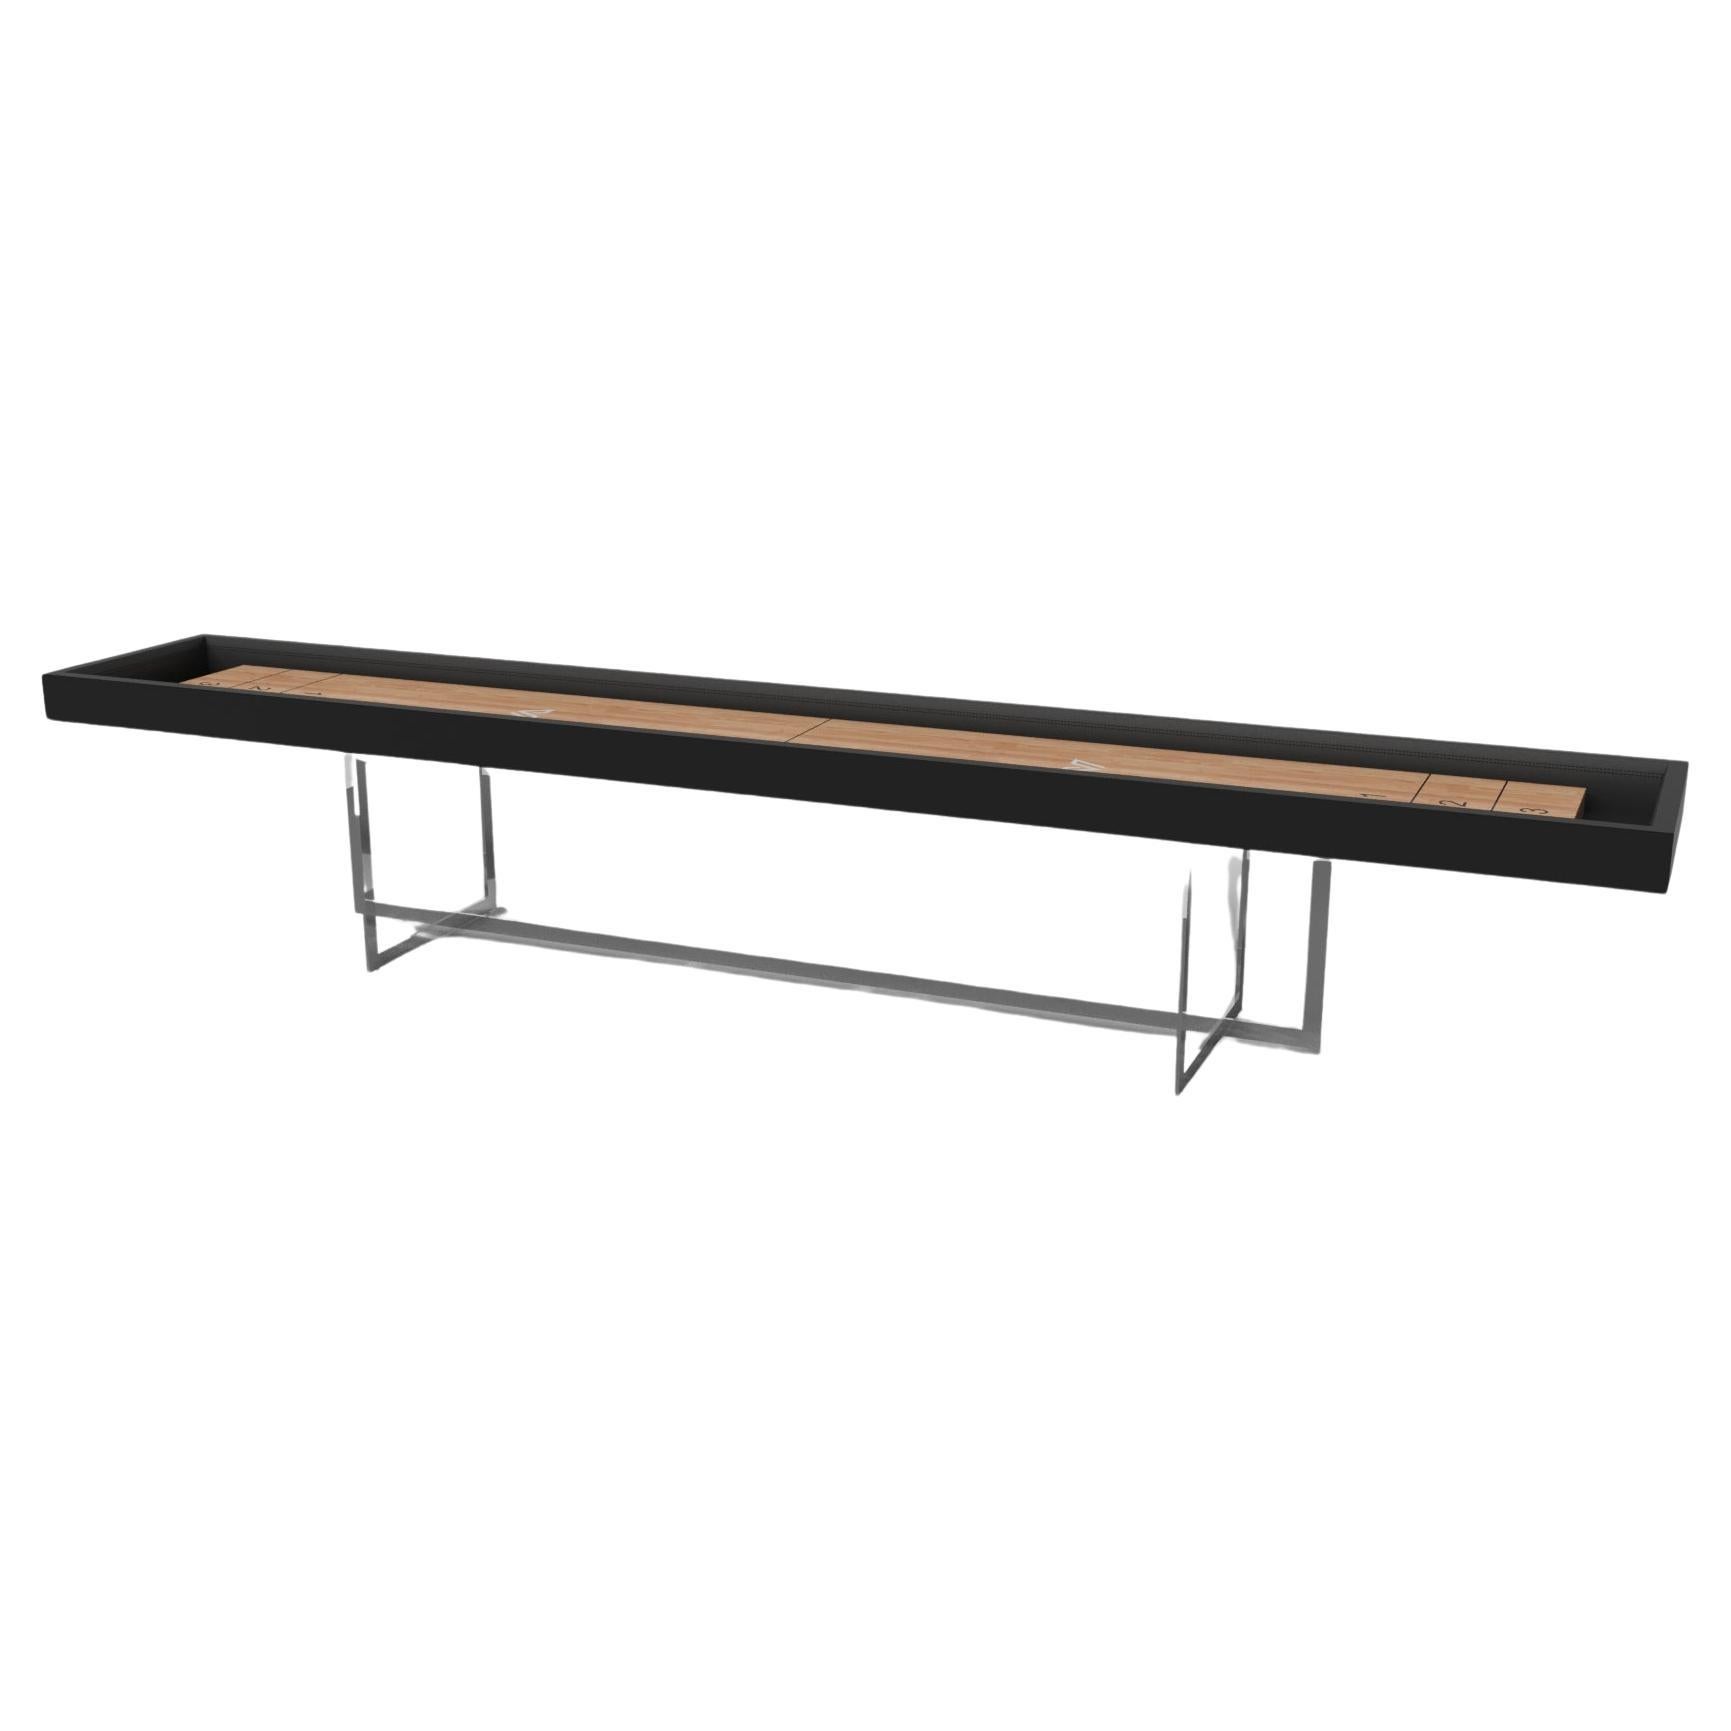 Elevate Customs Vogue Shuffleboard Tables /Solid Pantone Black Color in 16' -USA